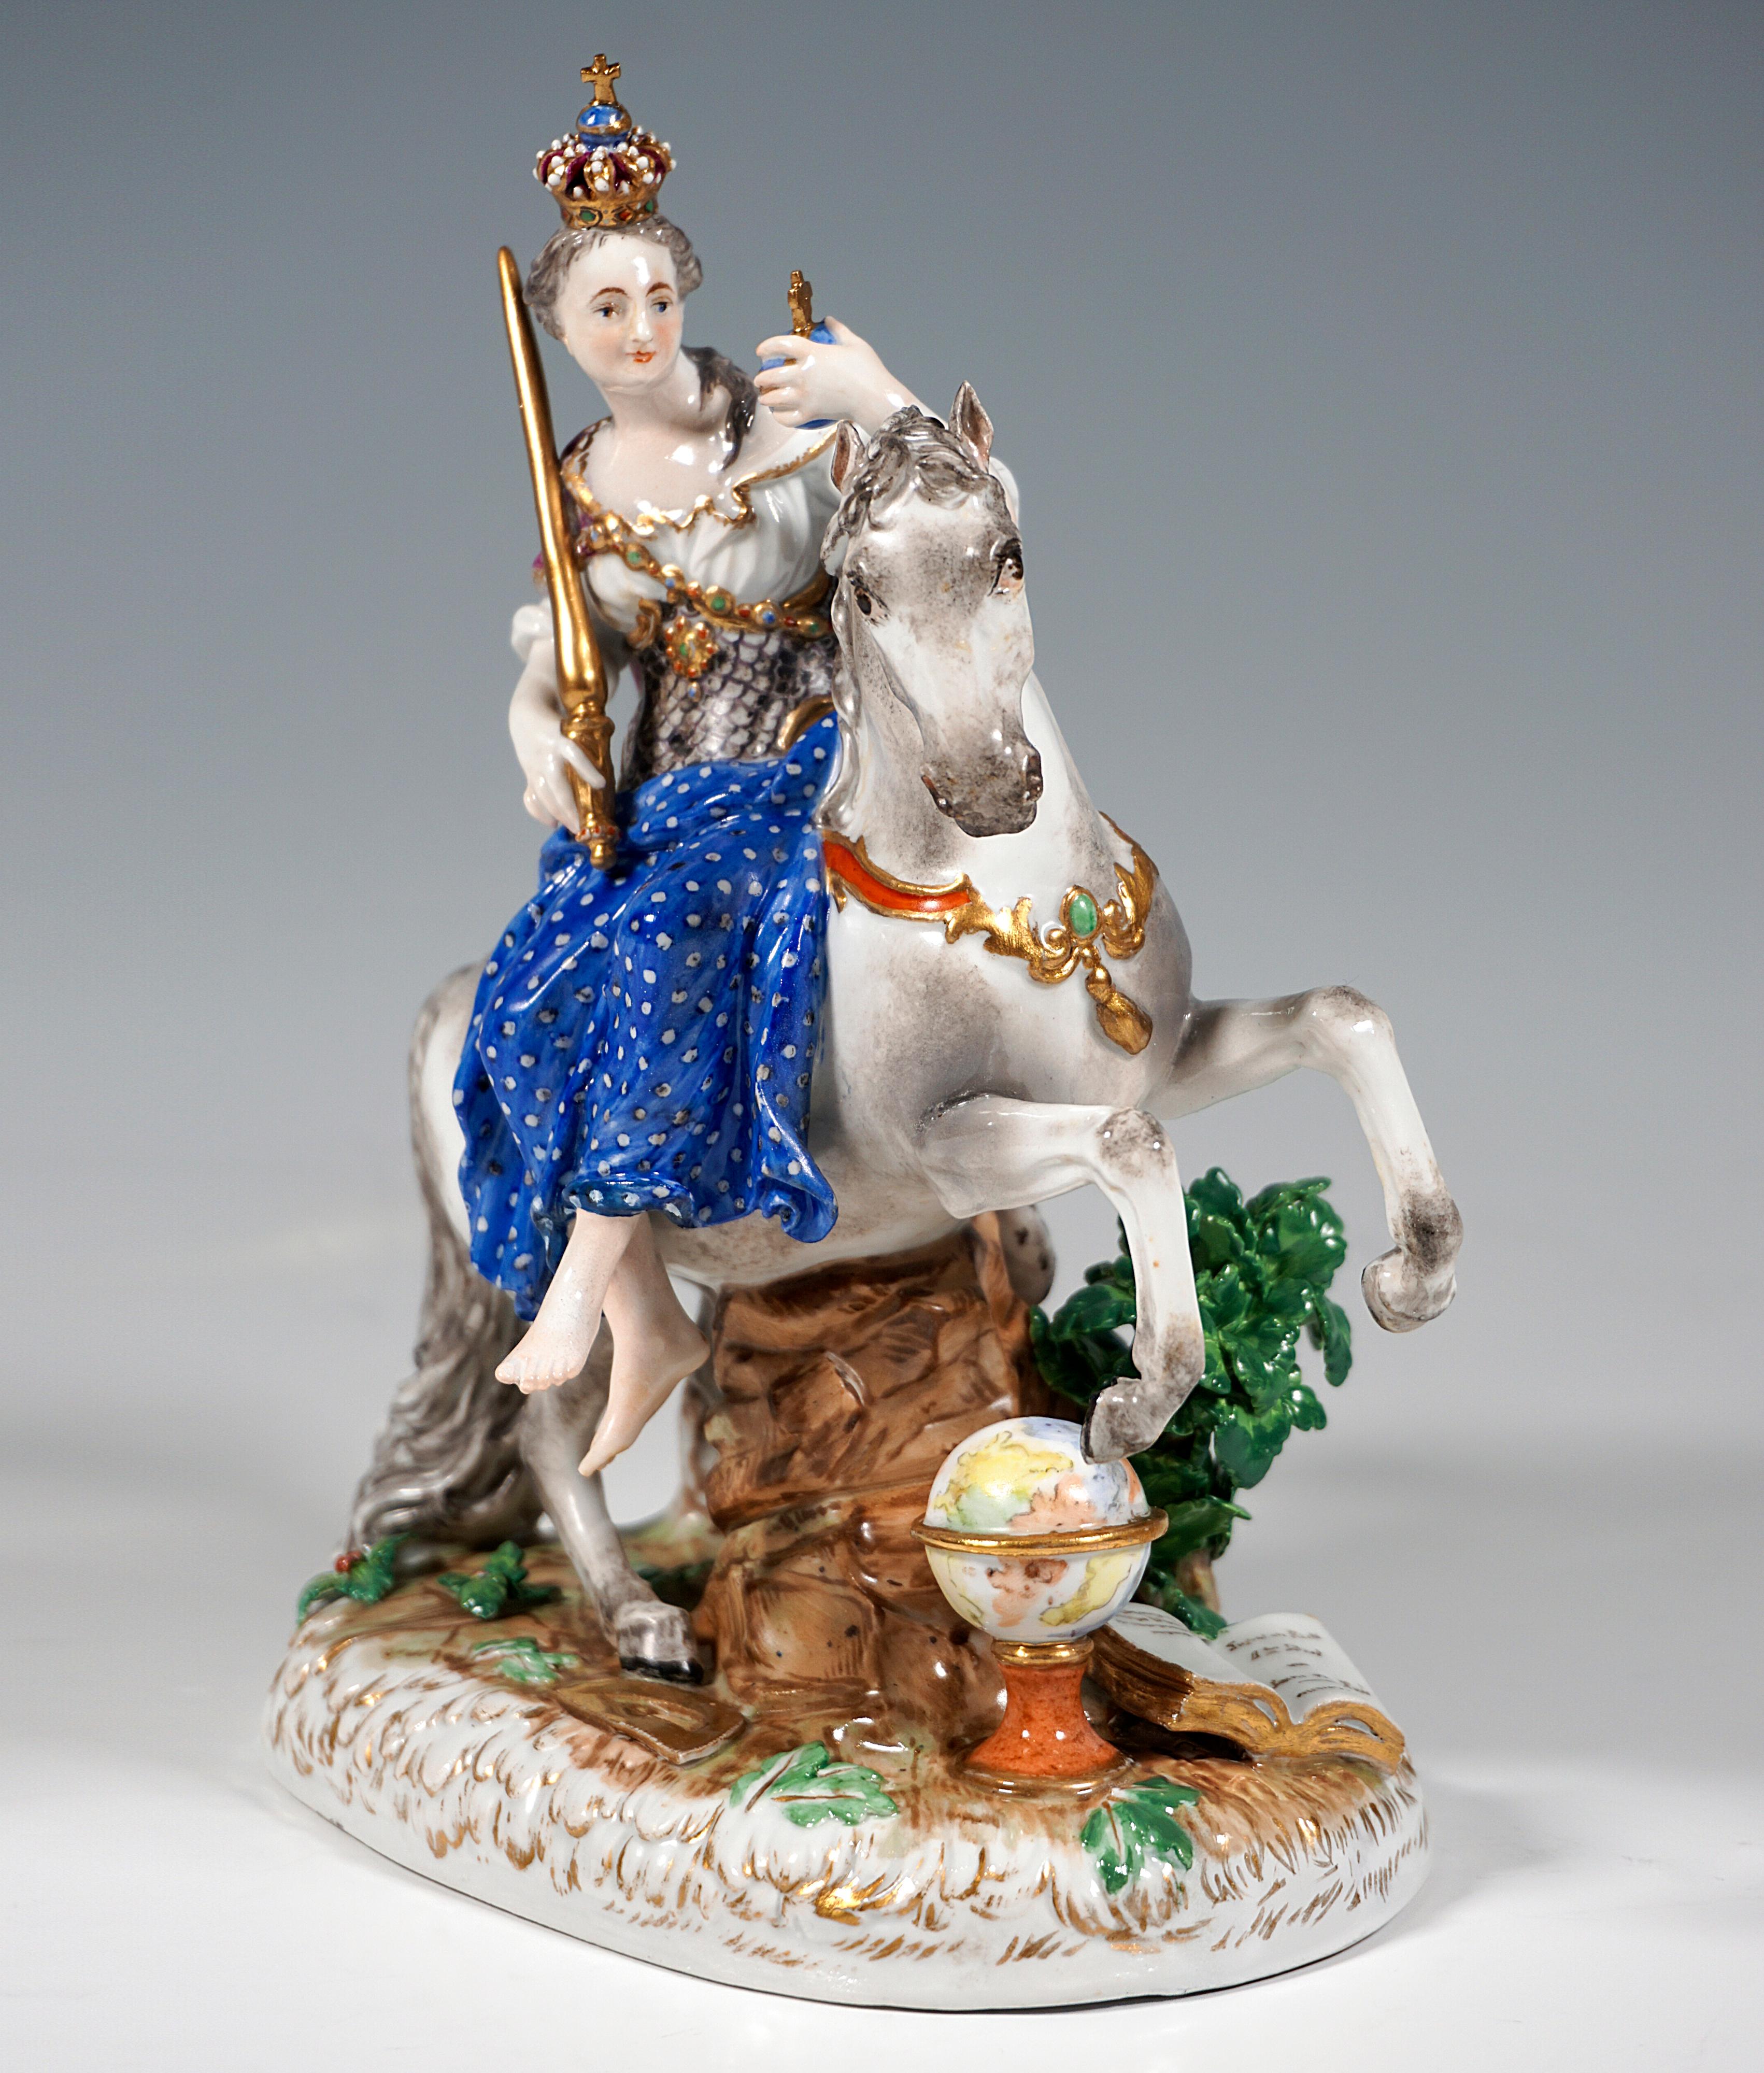 Very rare Meissen porcelain group of the 19th century:
Europe as young woman with imperial insignia: imperial crown on her upswept hair, imperial orb and scepter in her hands, dressed in chain bodice over blouse with golden hem, cape of gold and